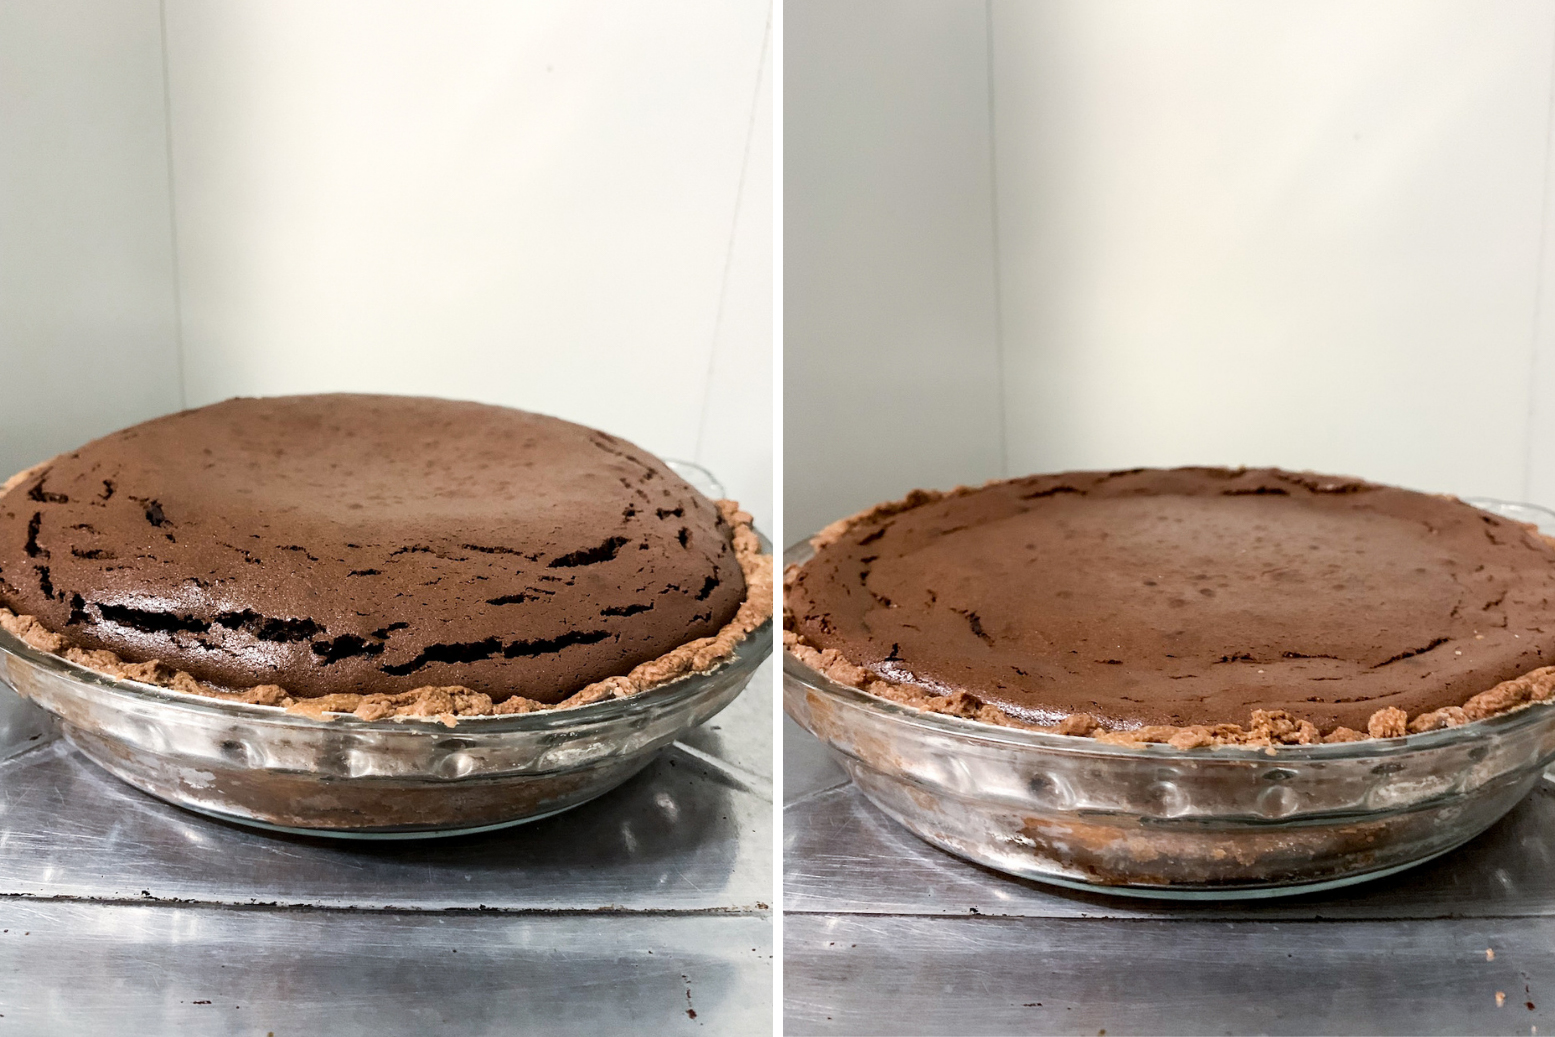 A rich, decadent chocolate and cream filling in a chocolate pie crust